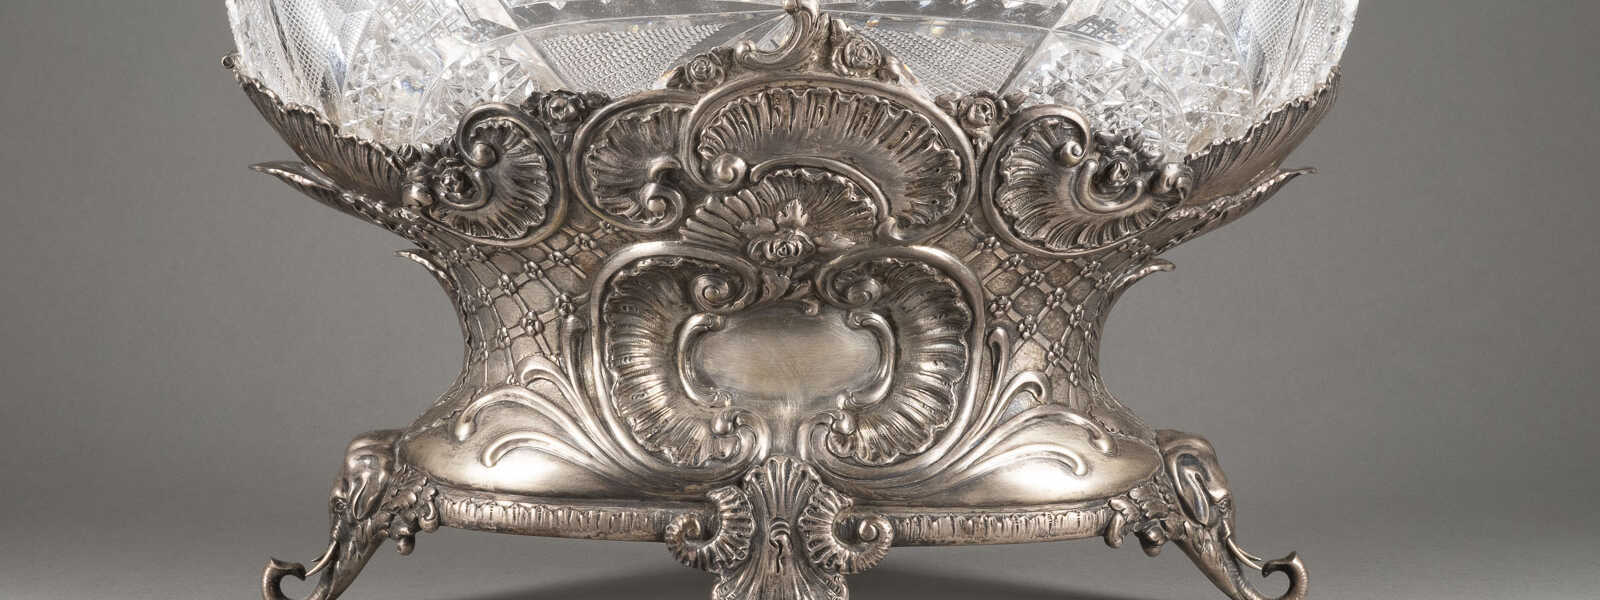 A LARGE SILVER-MOUNTED CUT GLASS CENTERPIECE ON ELEPHANT